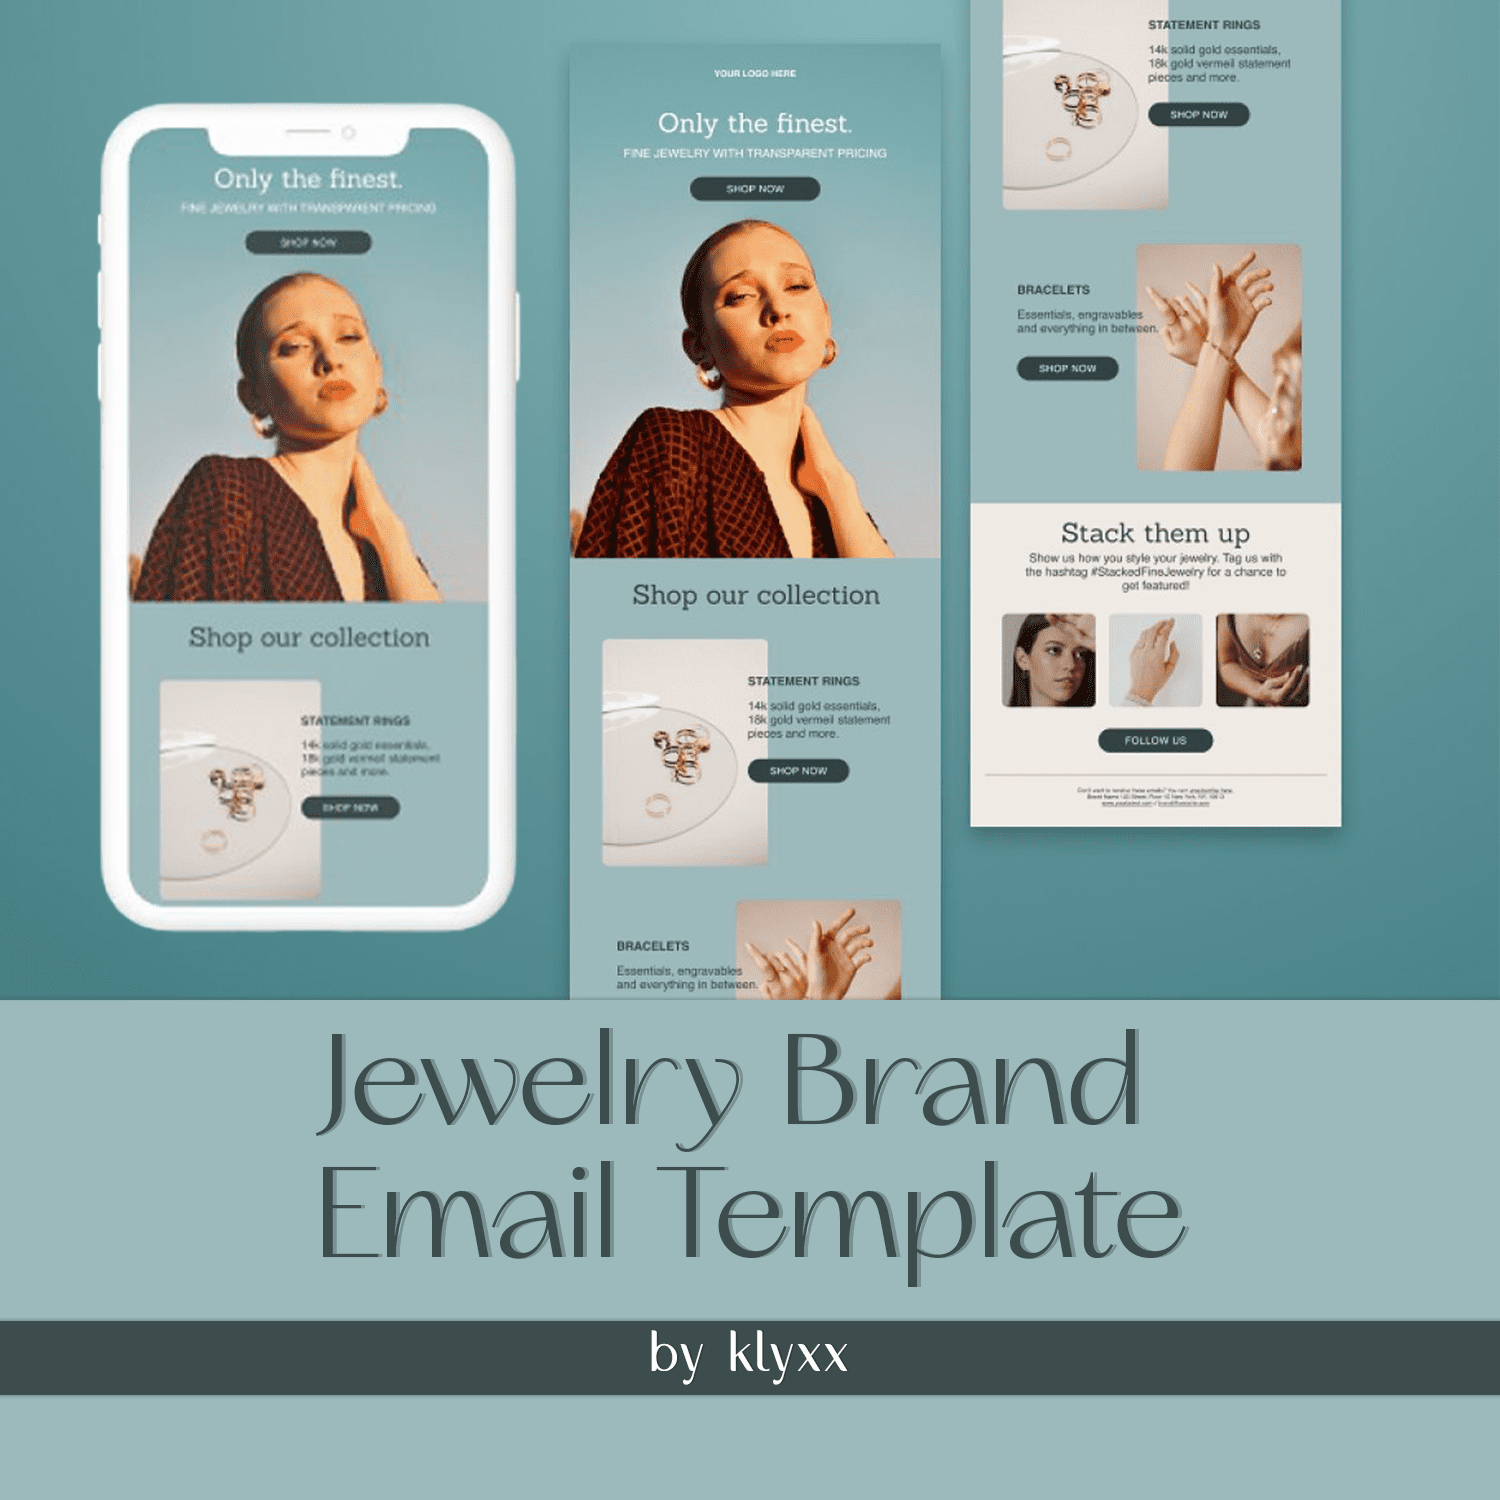 Set of images of elegant email design template for jewelry brand.